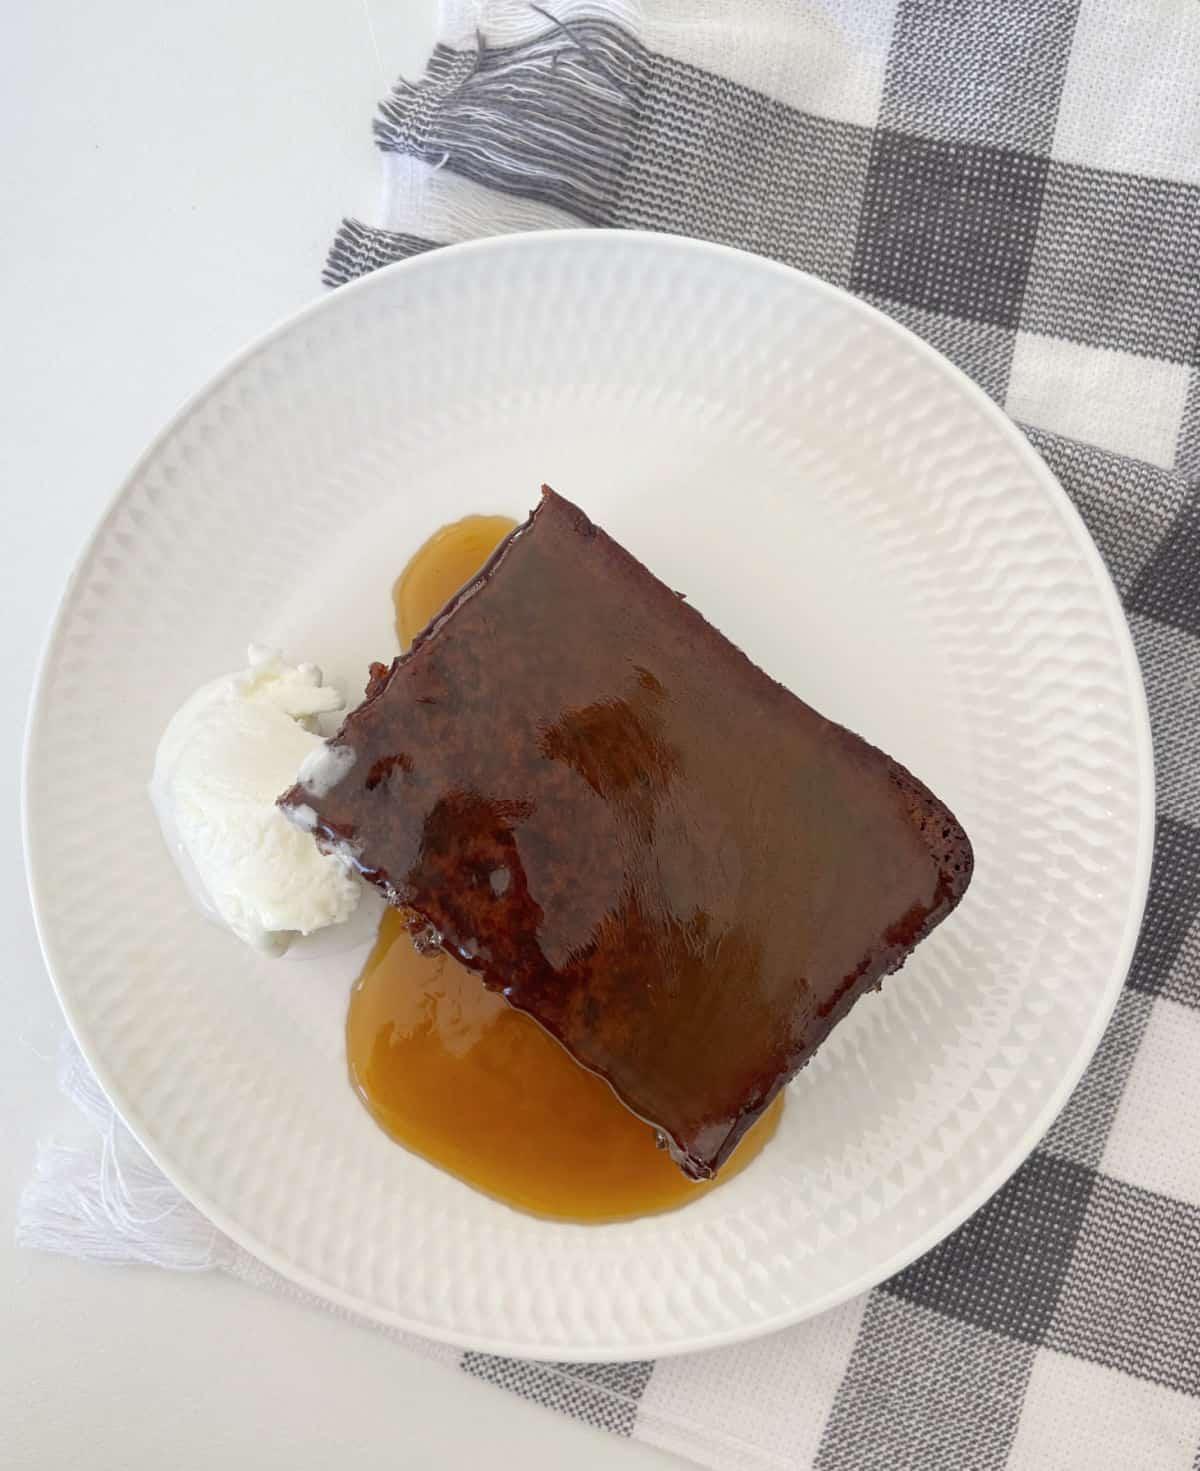 A slice of sticky date pudding sitting on a white plate with caramel sauce and ice-cream.